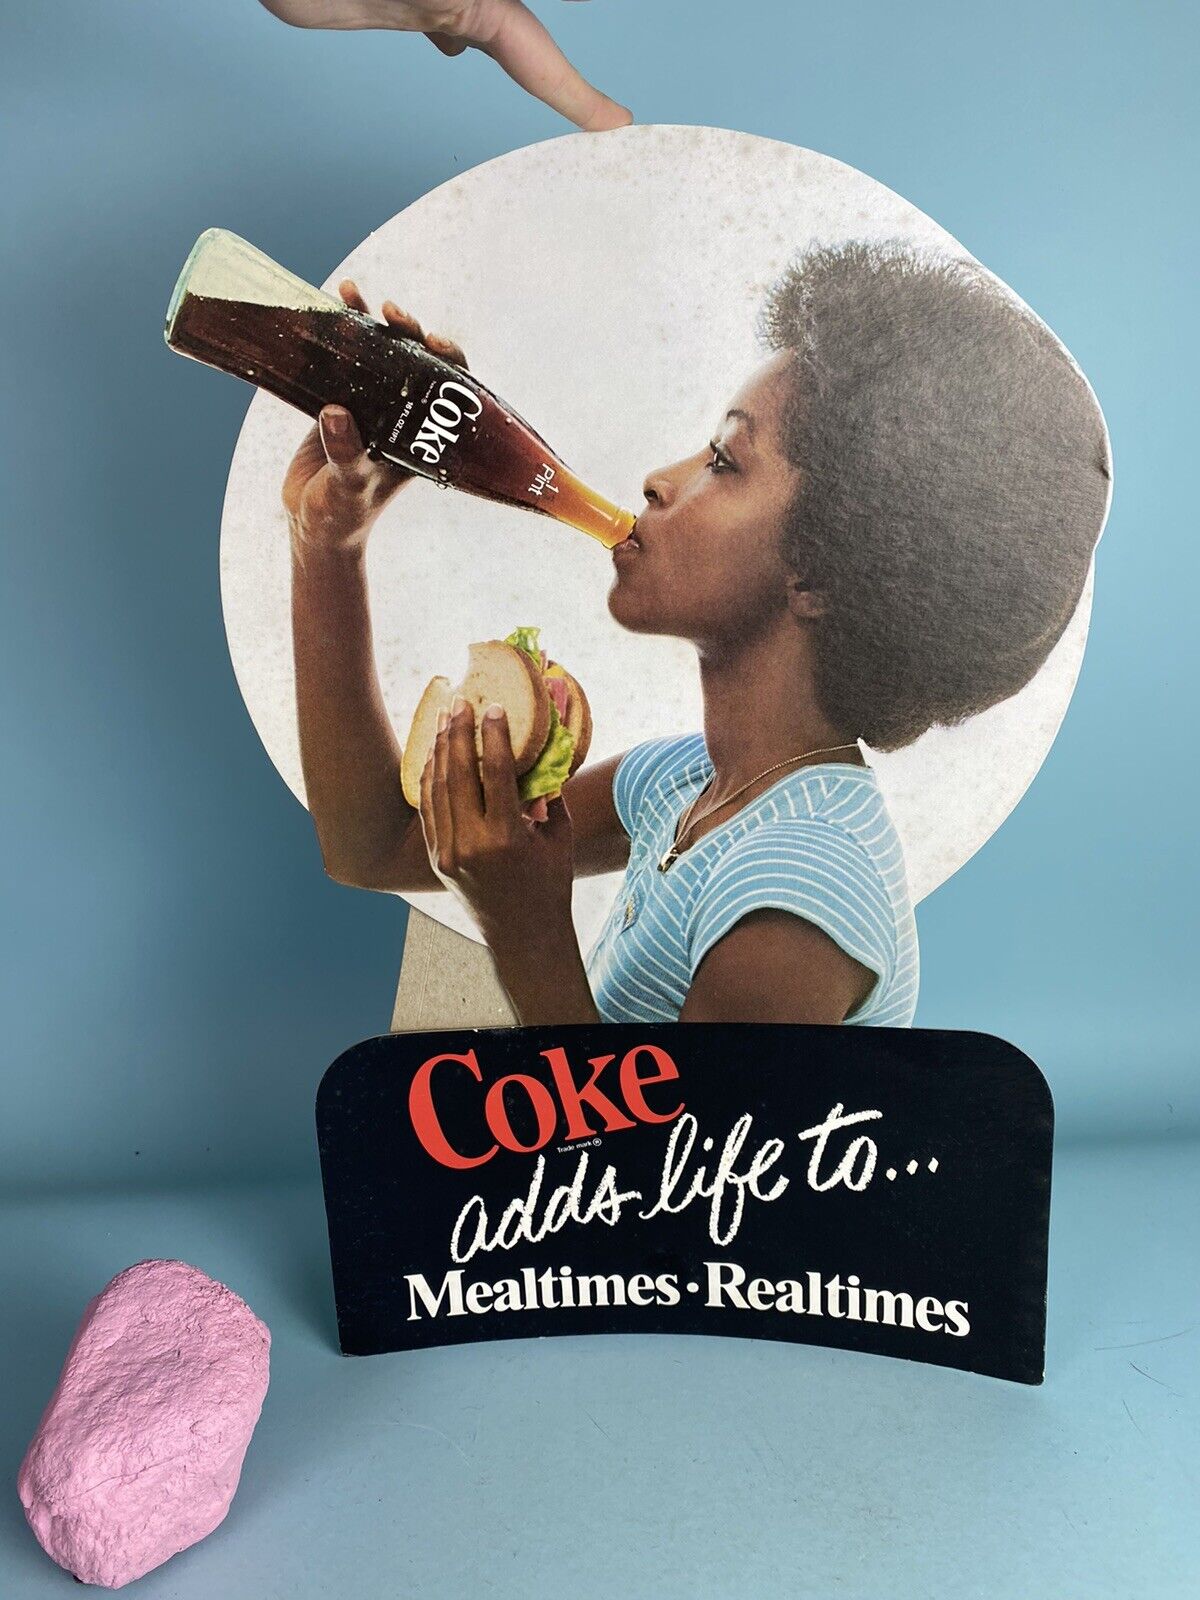 Coke Adds Life To Mealtimes Realtimes - 70s Vintage Printed Counter Card Ad